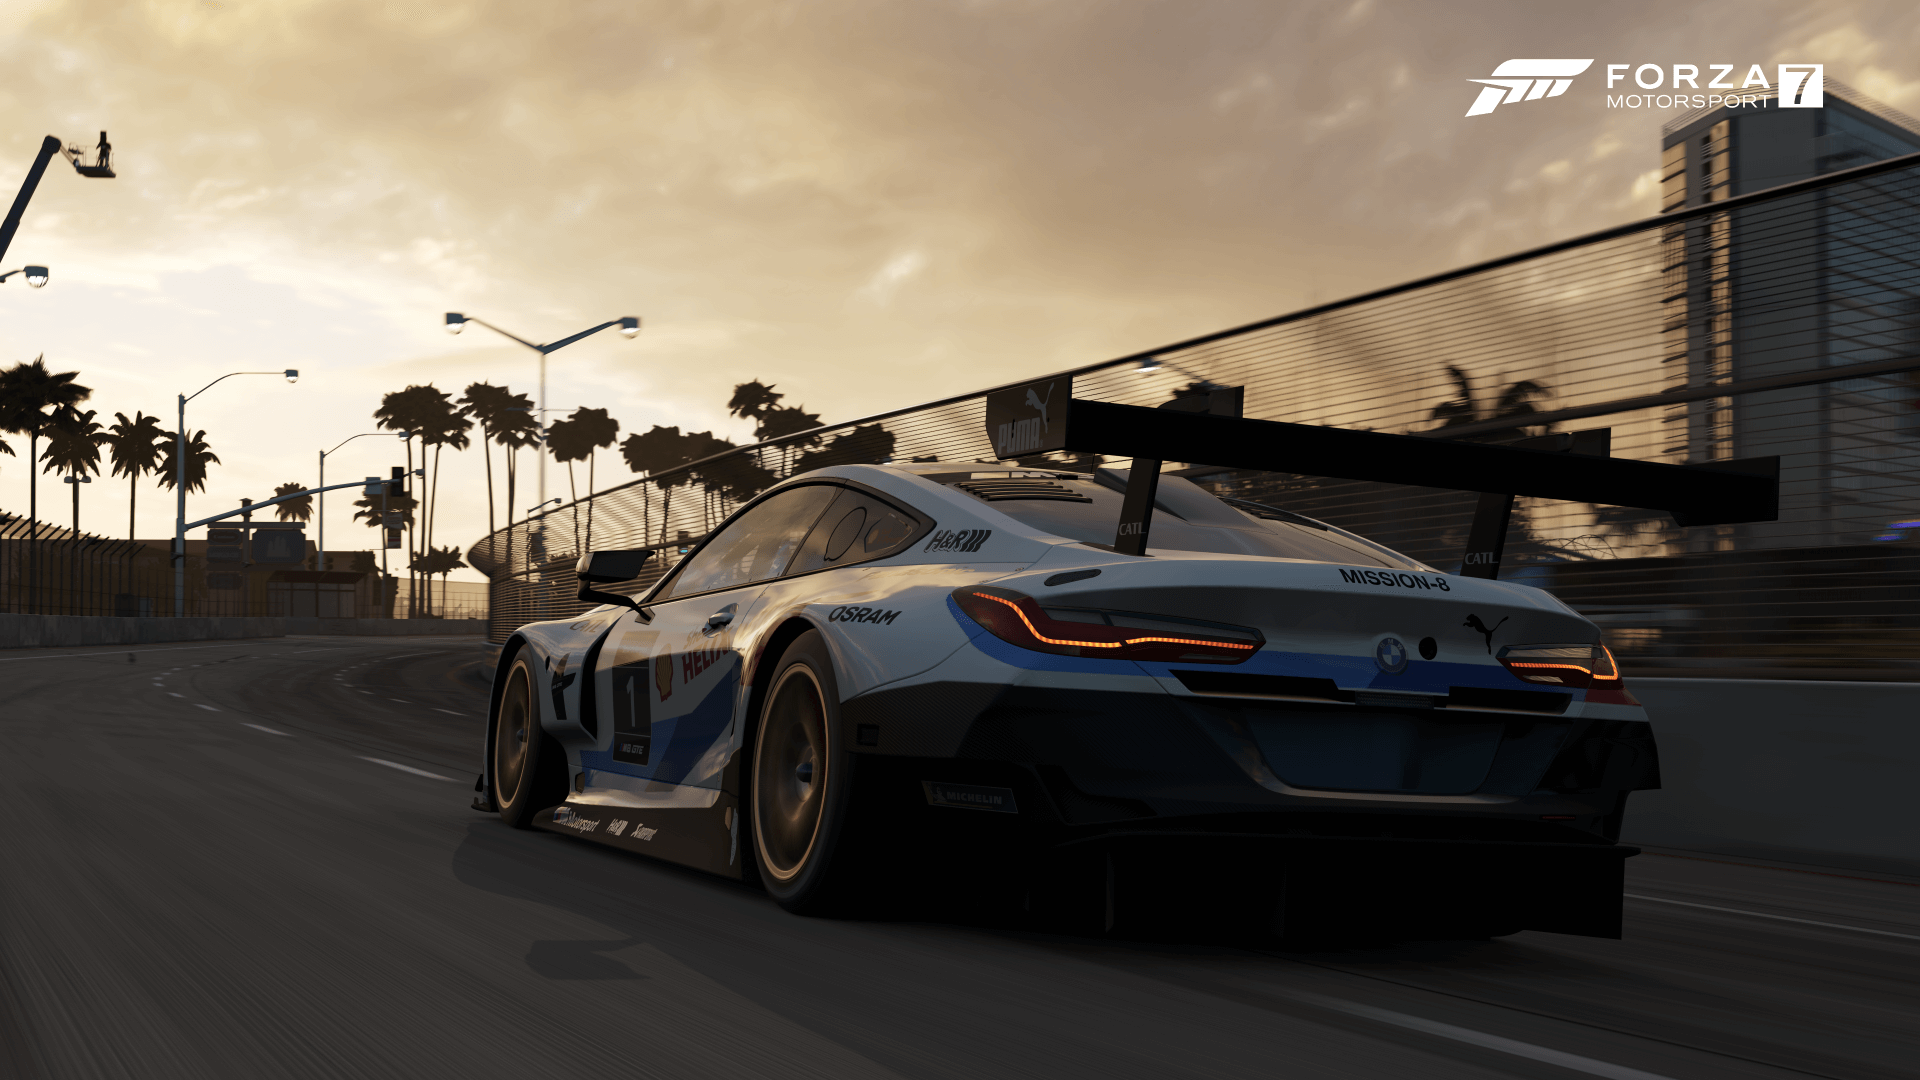 Our Review of Forza Motorsport 7: Is It Worth the Upgrade?